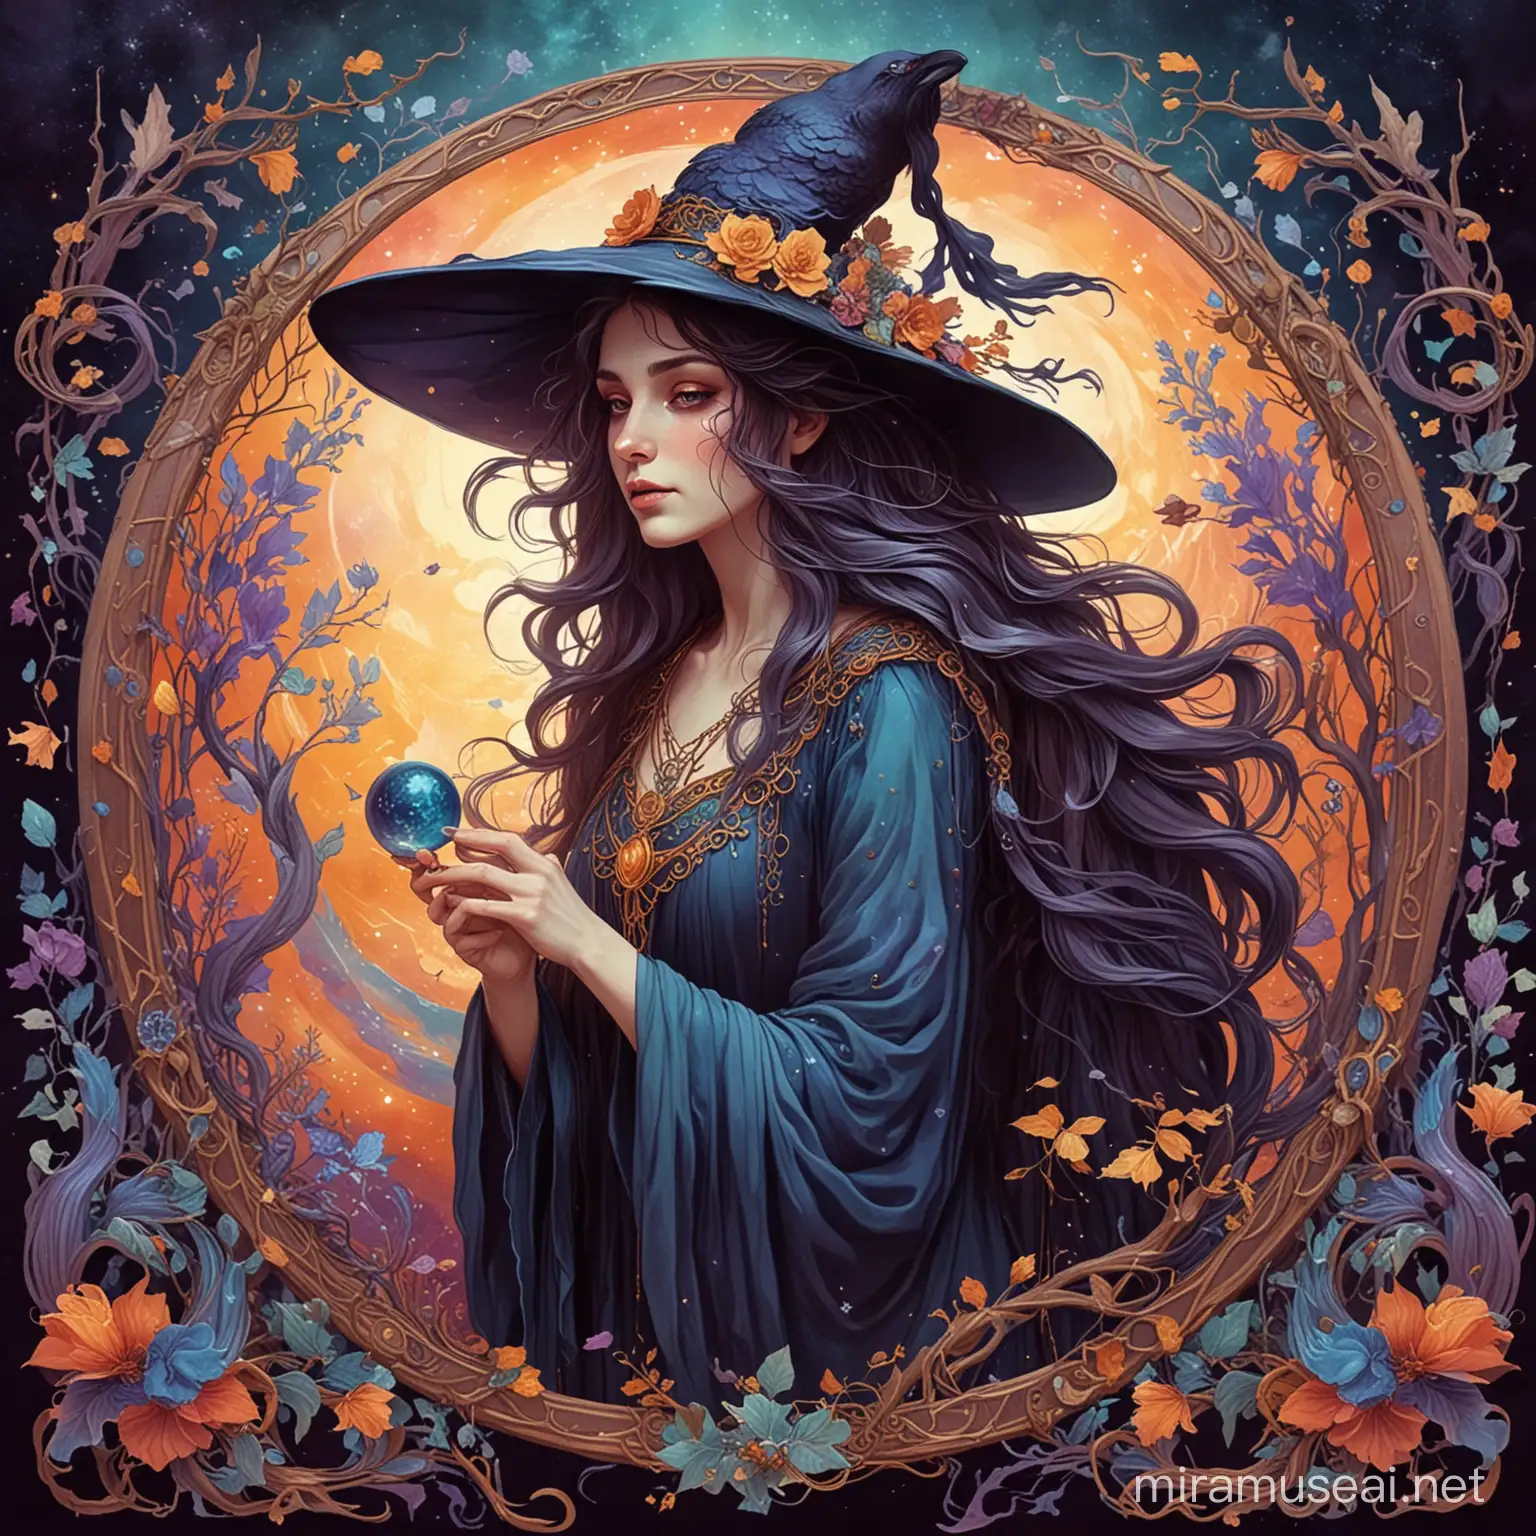 art nouveau style, ancient witch lost in a spell, mystical world, colorful